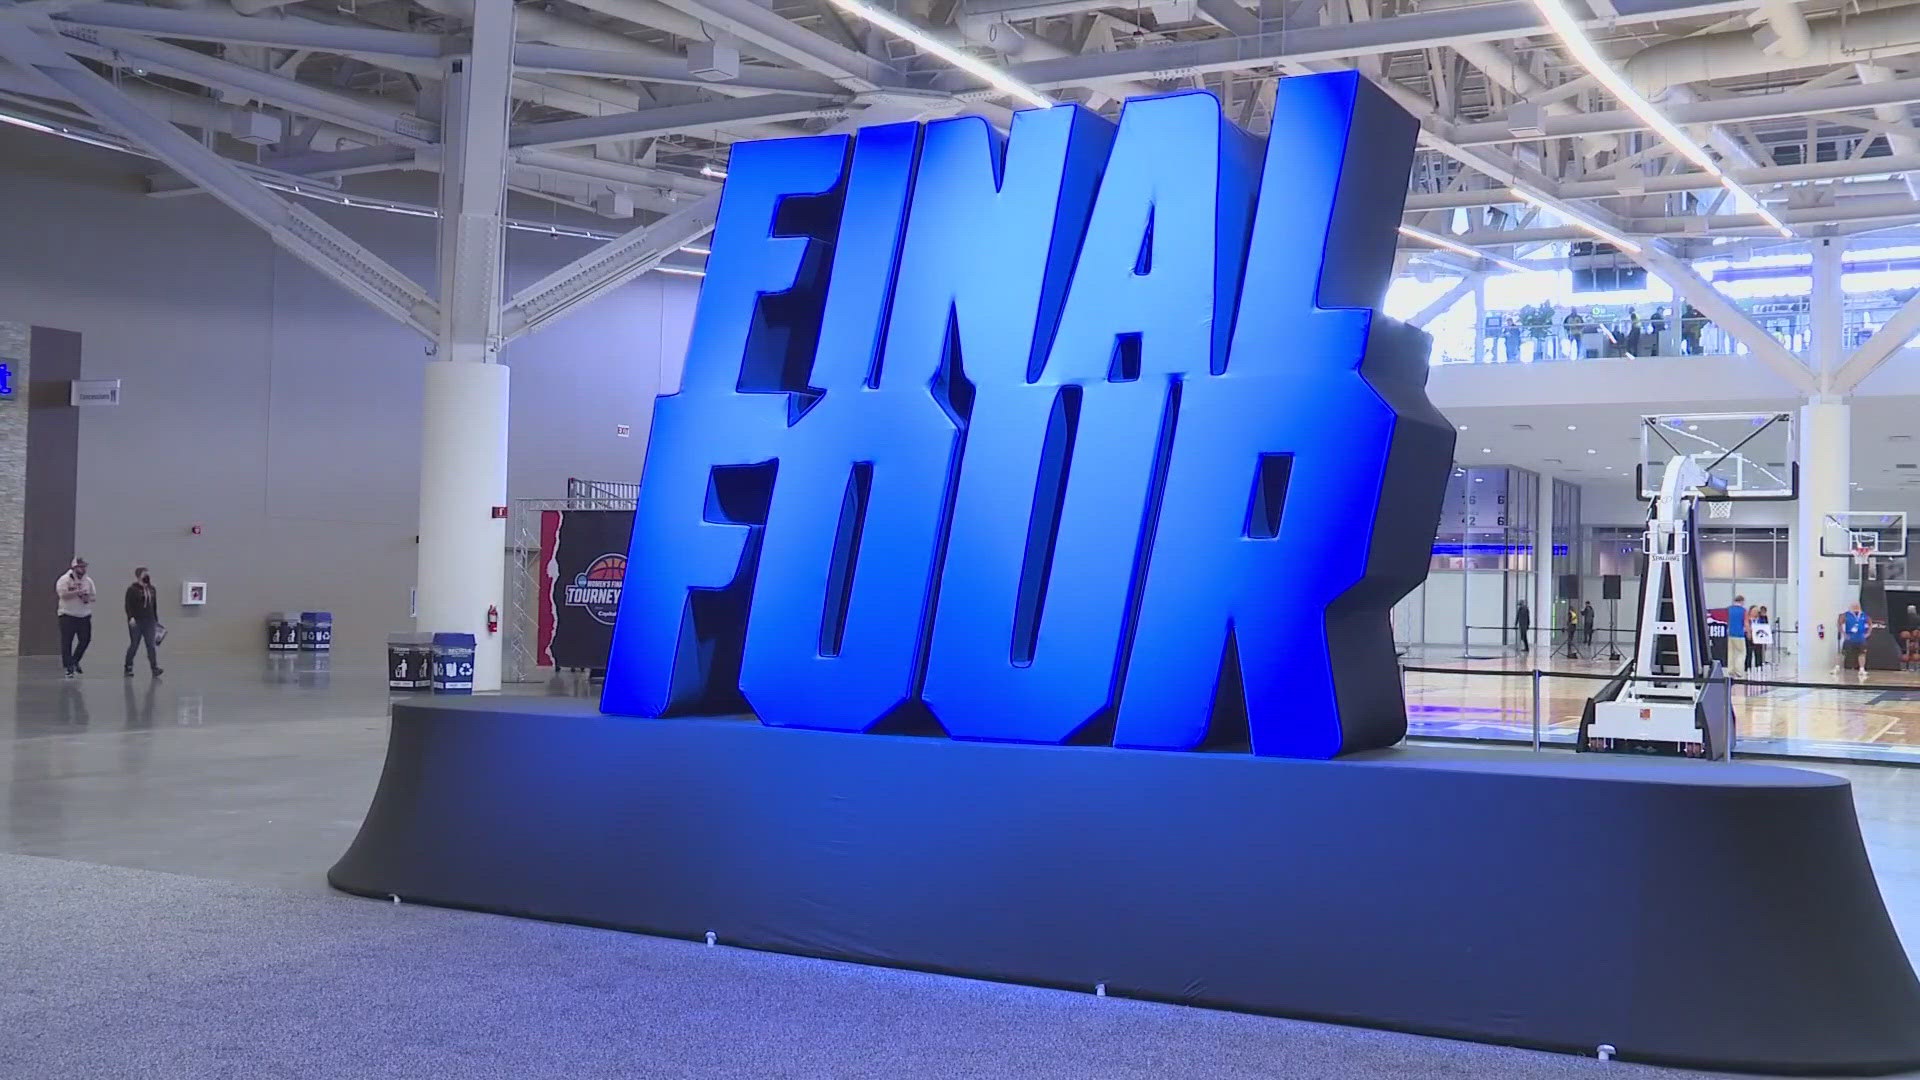 The NCAA Final Four Tournament begins on Friday, April 5, at Rocket Mortgage FieldHouse in Cleveland.